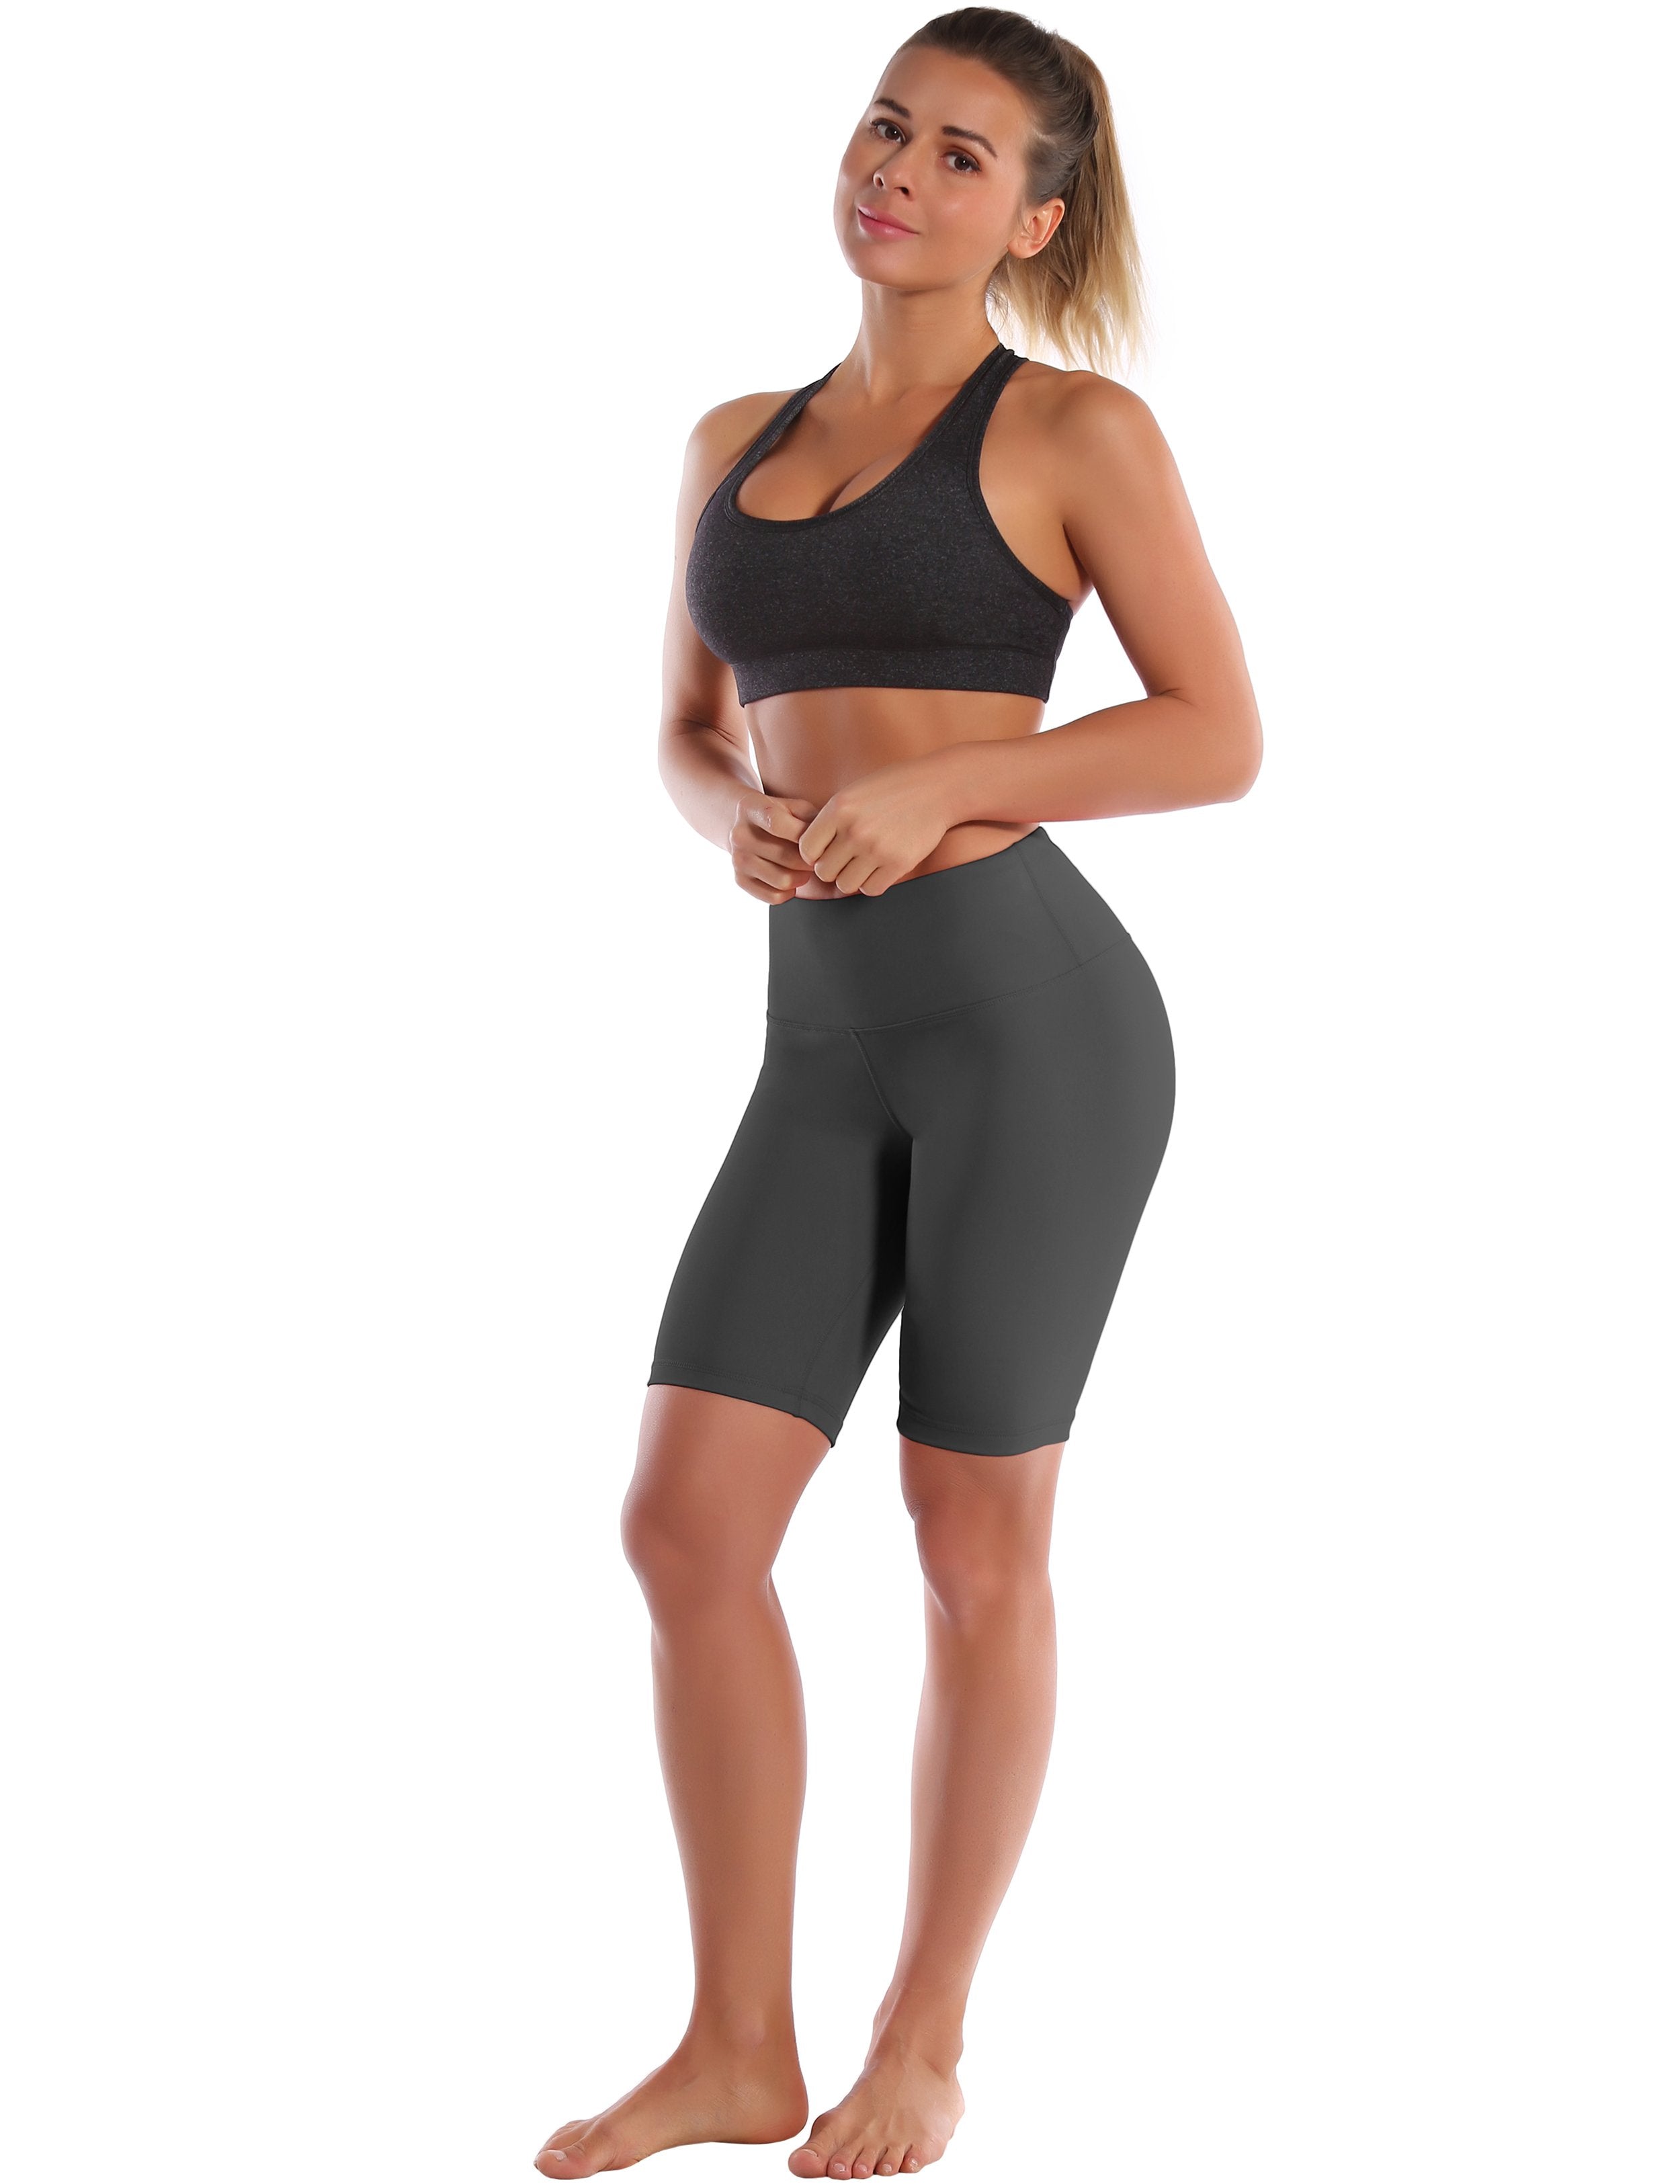 8" High Waist Golf Shorts shadowcharcoal Sleek, soft, smooth and totally comfortable: our newest style is here. Softest-ever fabric High elasticity High density 4-way stretch Fabric doesn't attract lint easily No see-through Moisture-wicking Machine wash 75% Nylon, 25% Spandex